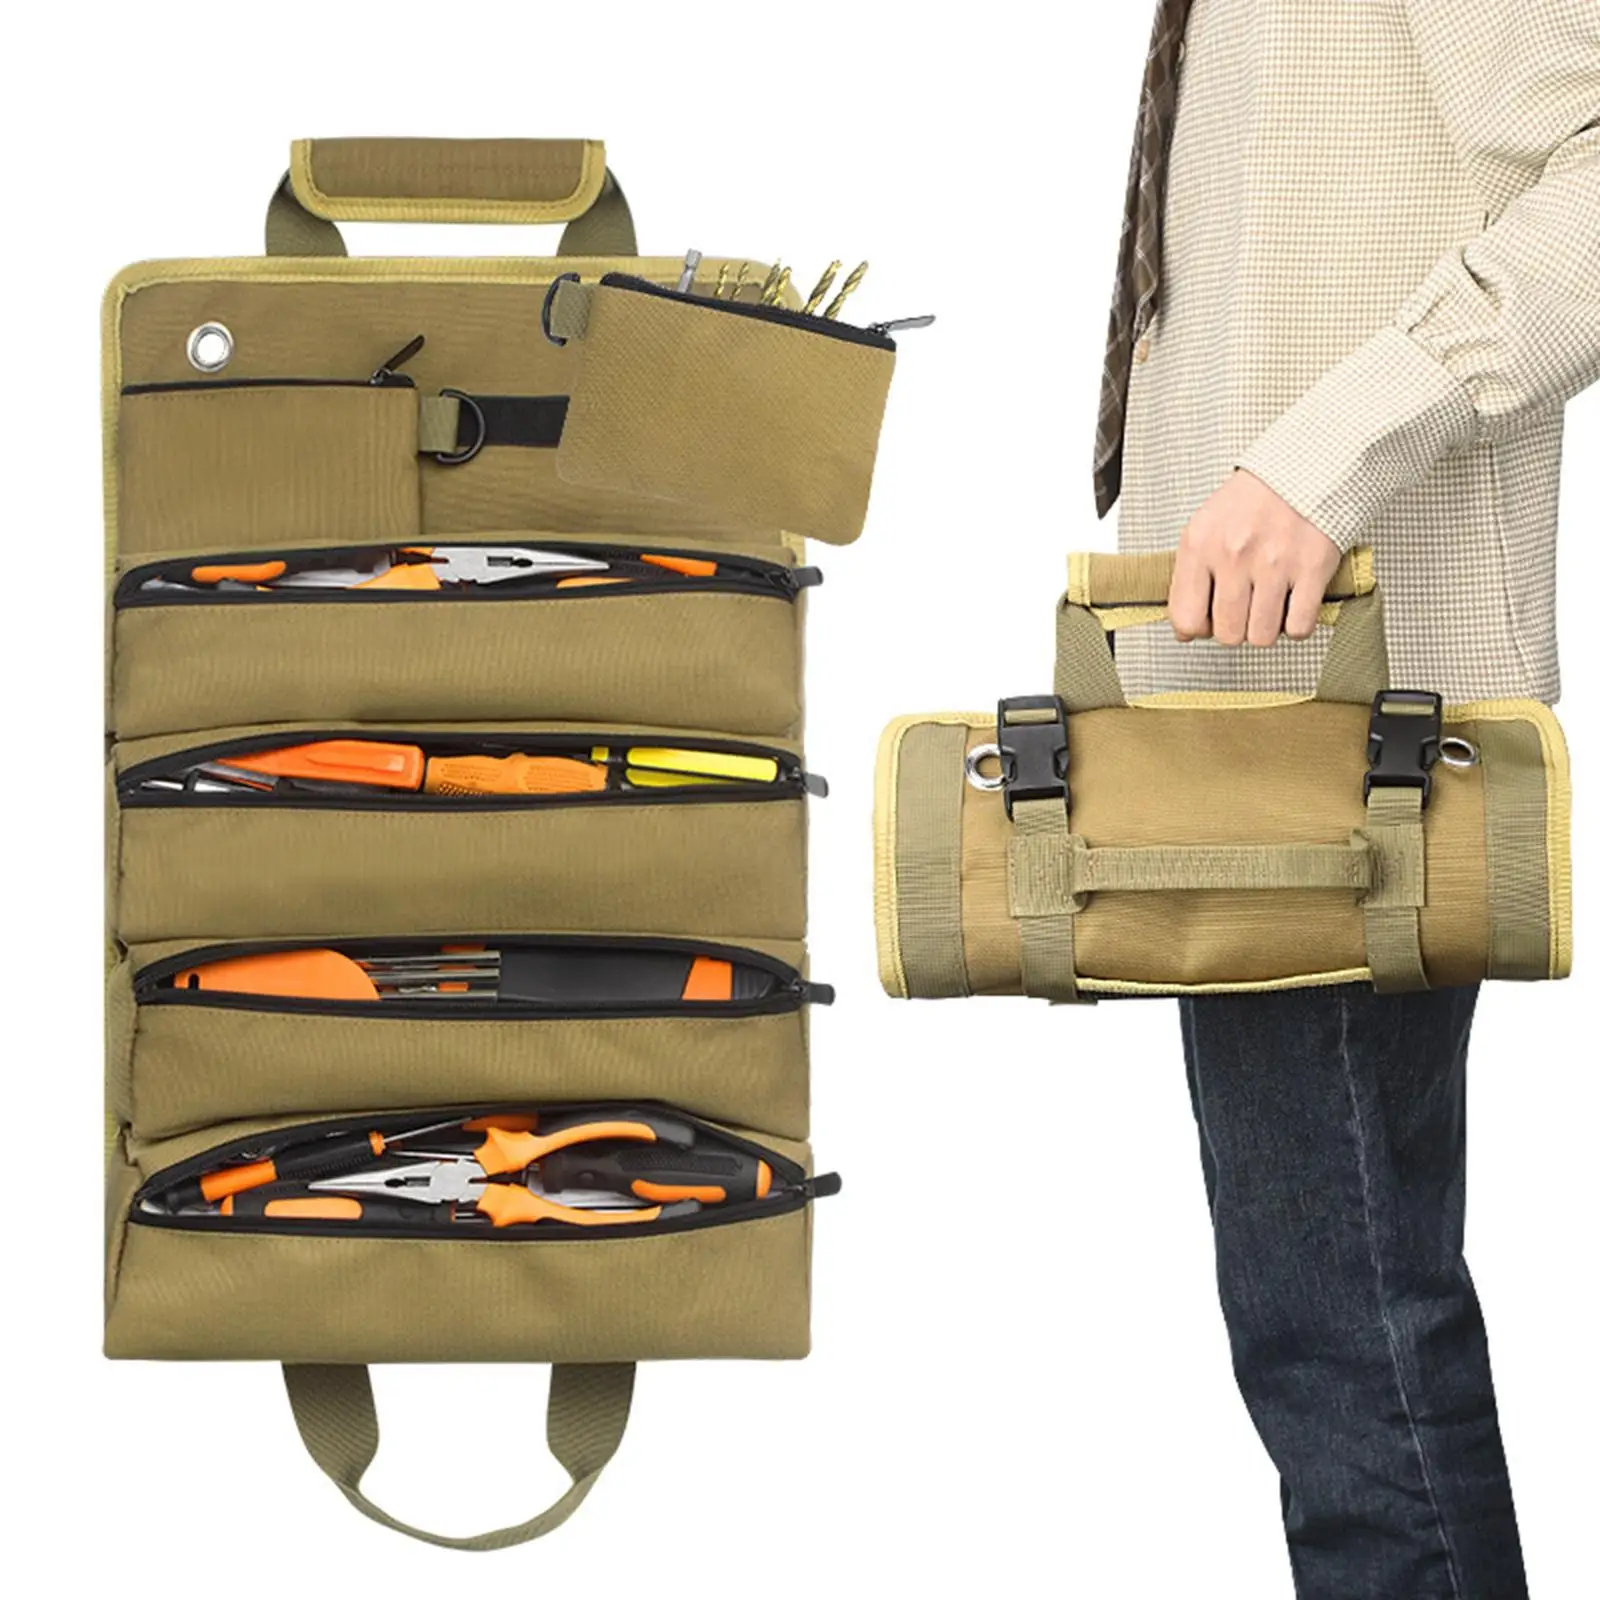 Tool Roll Pouch Roll Storage Organizer Handbag Roll up Tool Bag Organizer for Electrician Mechanic Woodworking Carpenter Plumber